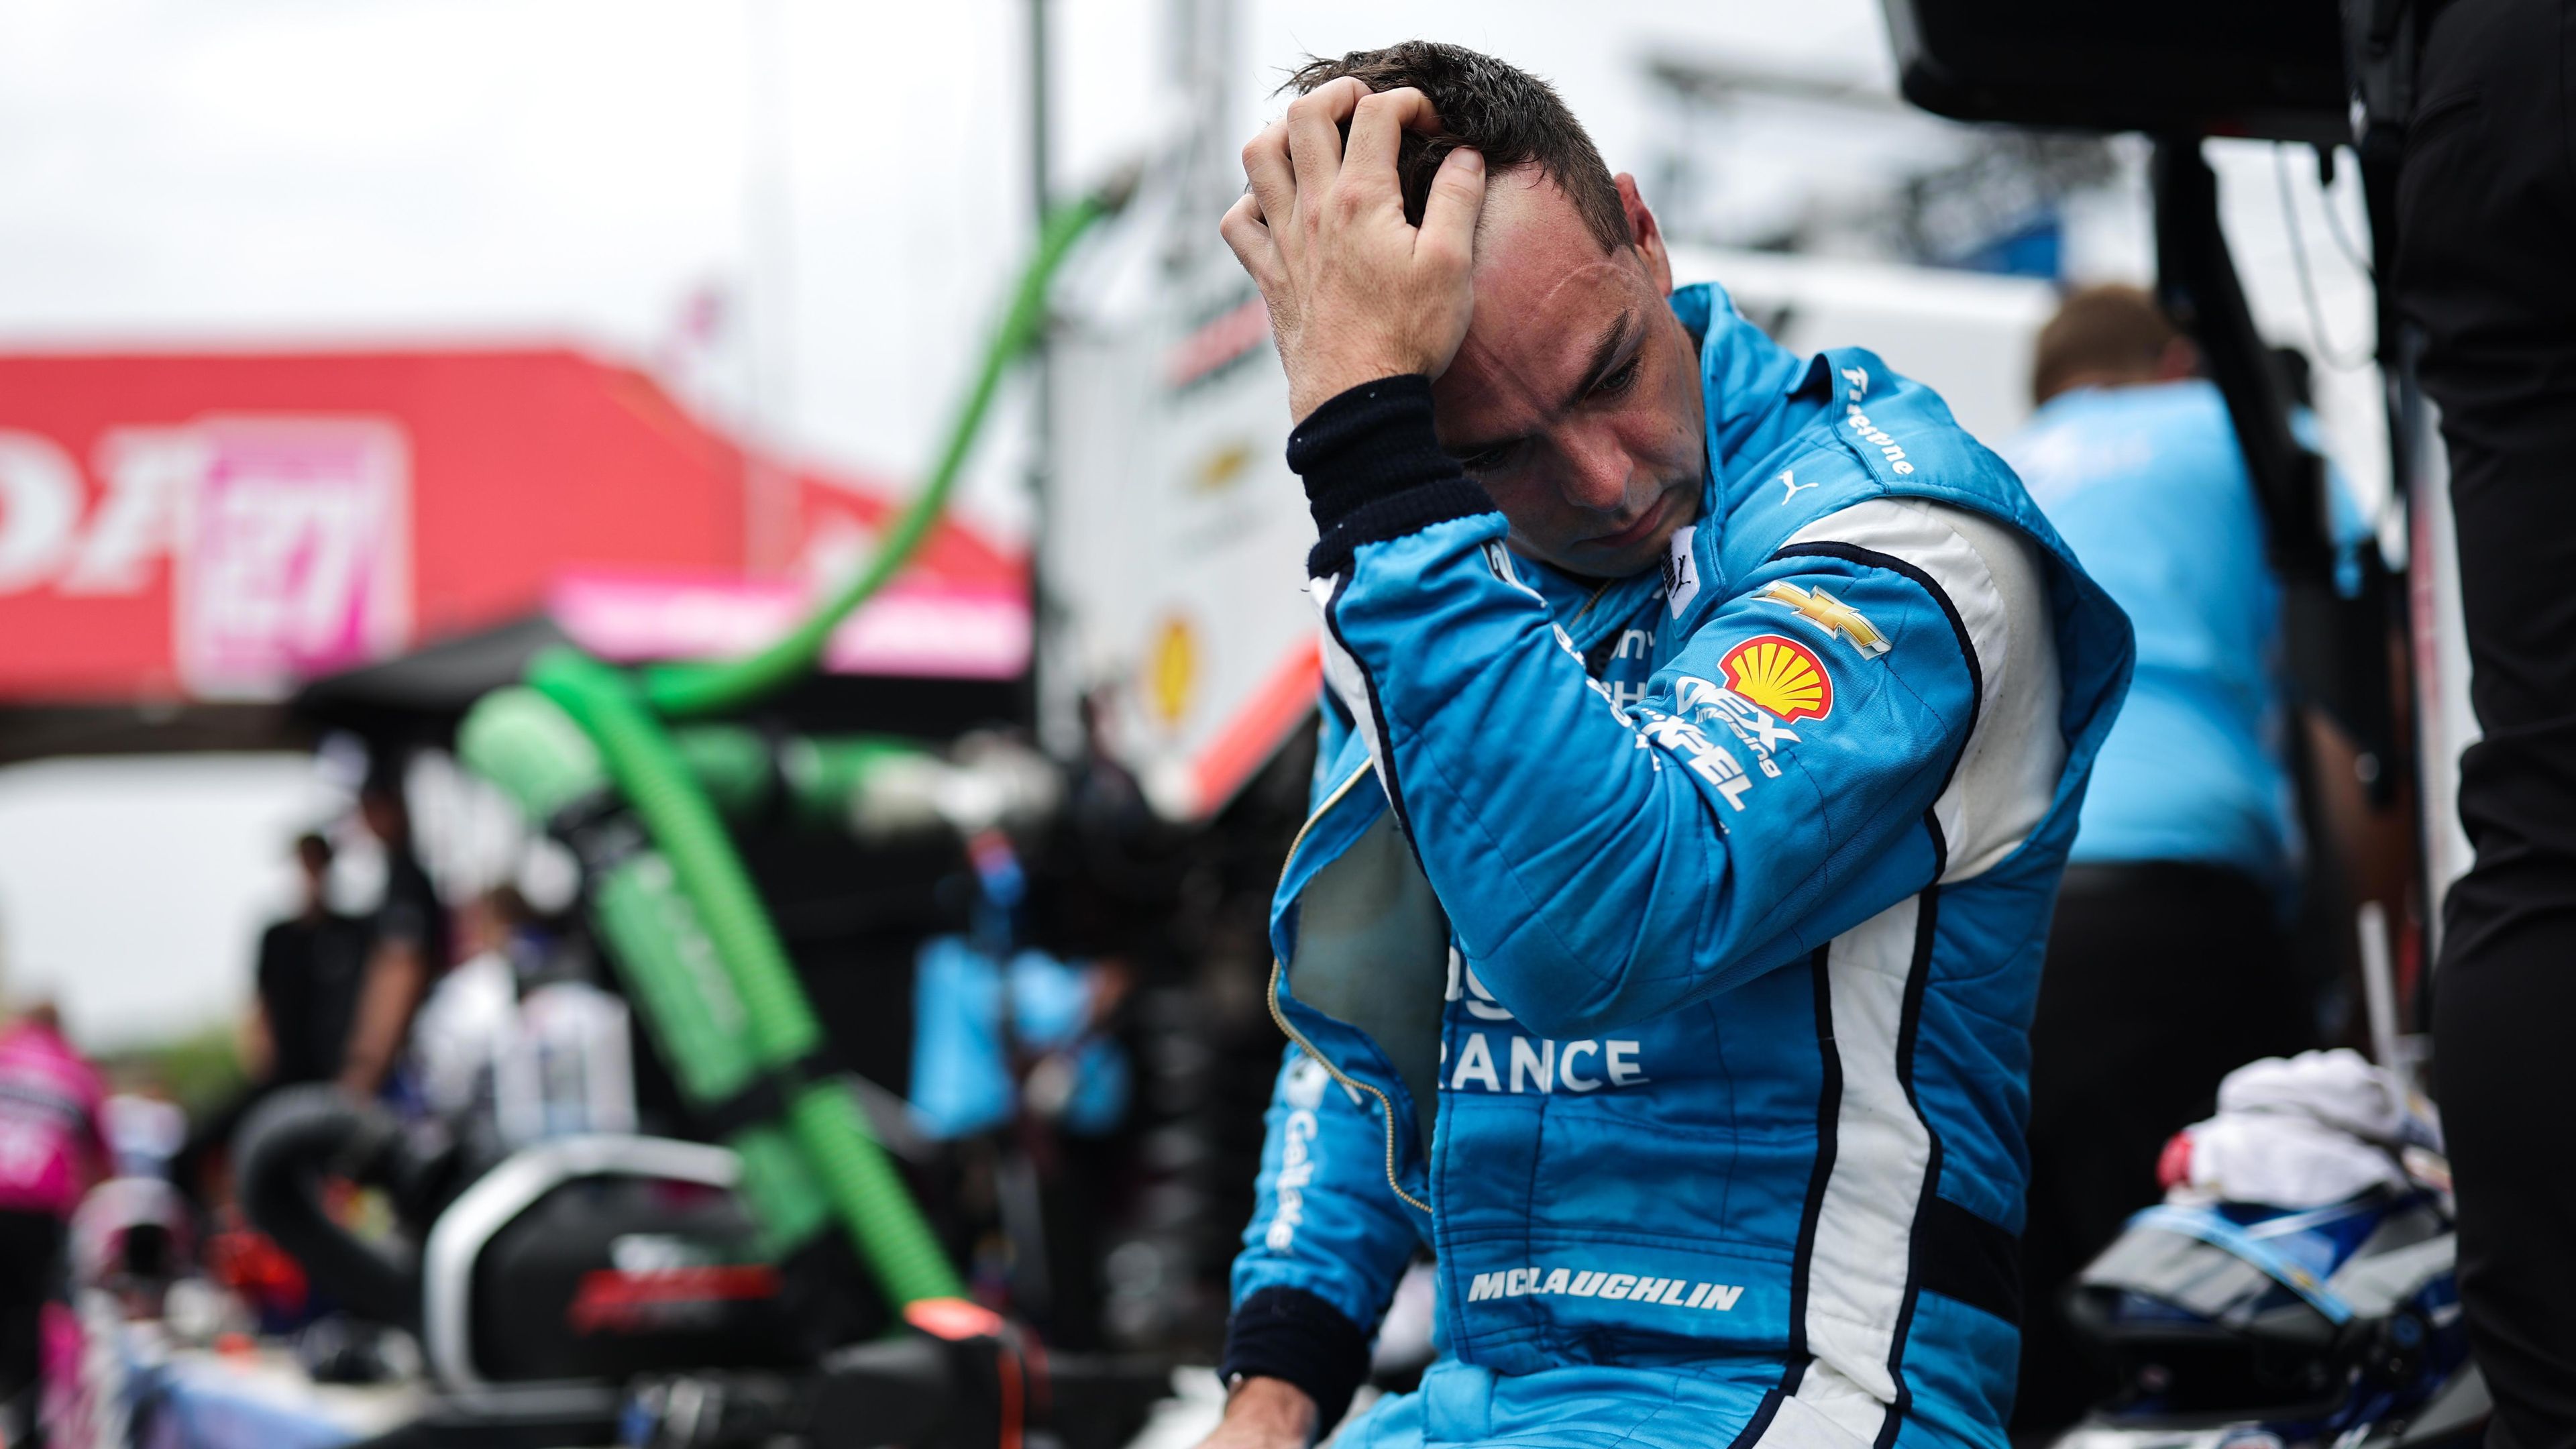 Scott McLaughlin finished sixth in the IndyCar race at Toronto.